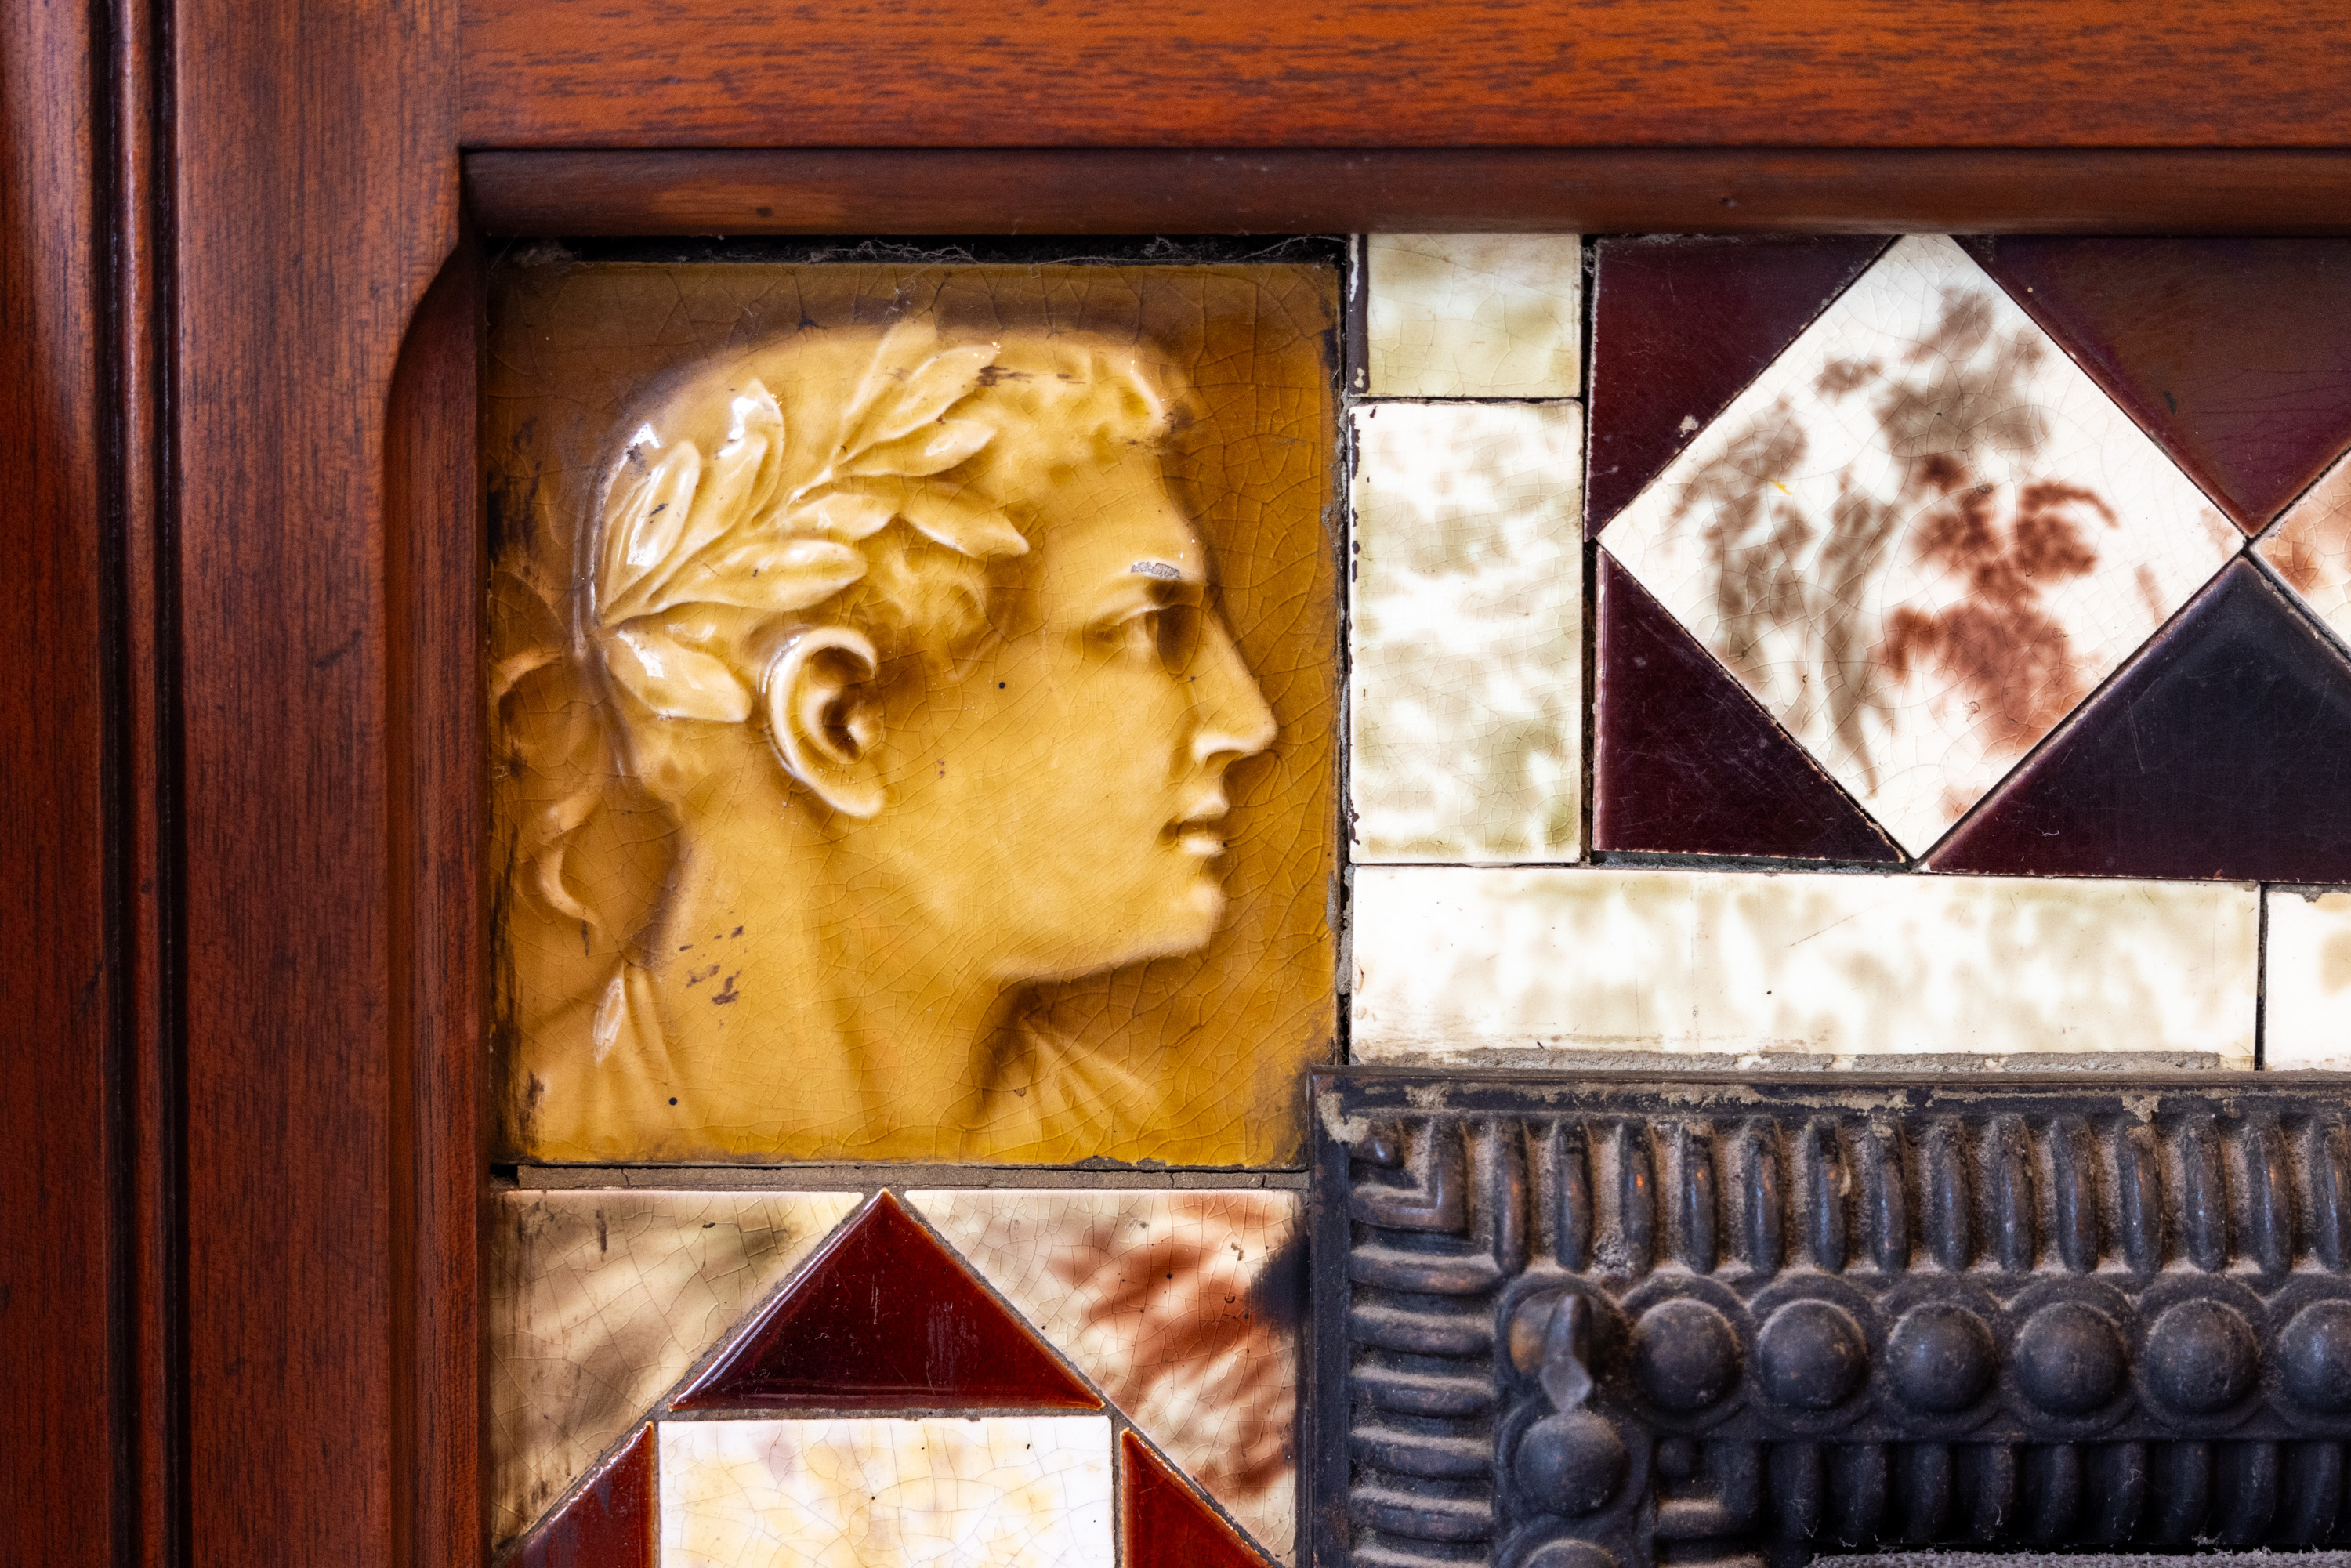 The image features a carved classical profile of a man's head with a laurel wreath, set in a wooden frame and surrounded by decorative tiles with various patterns.